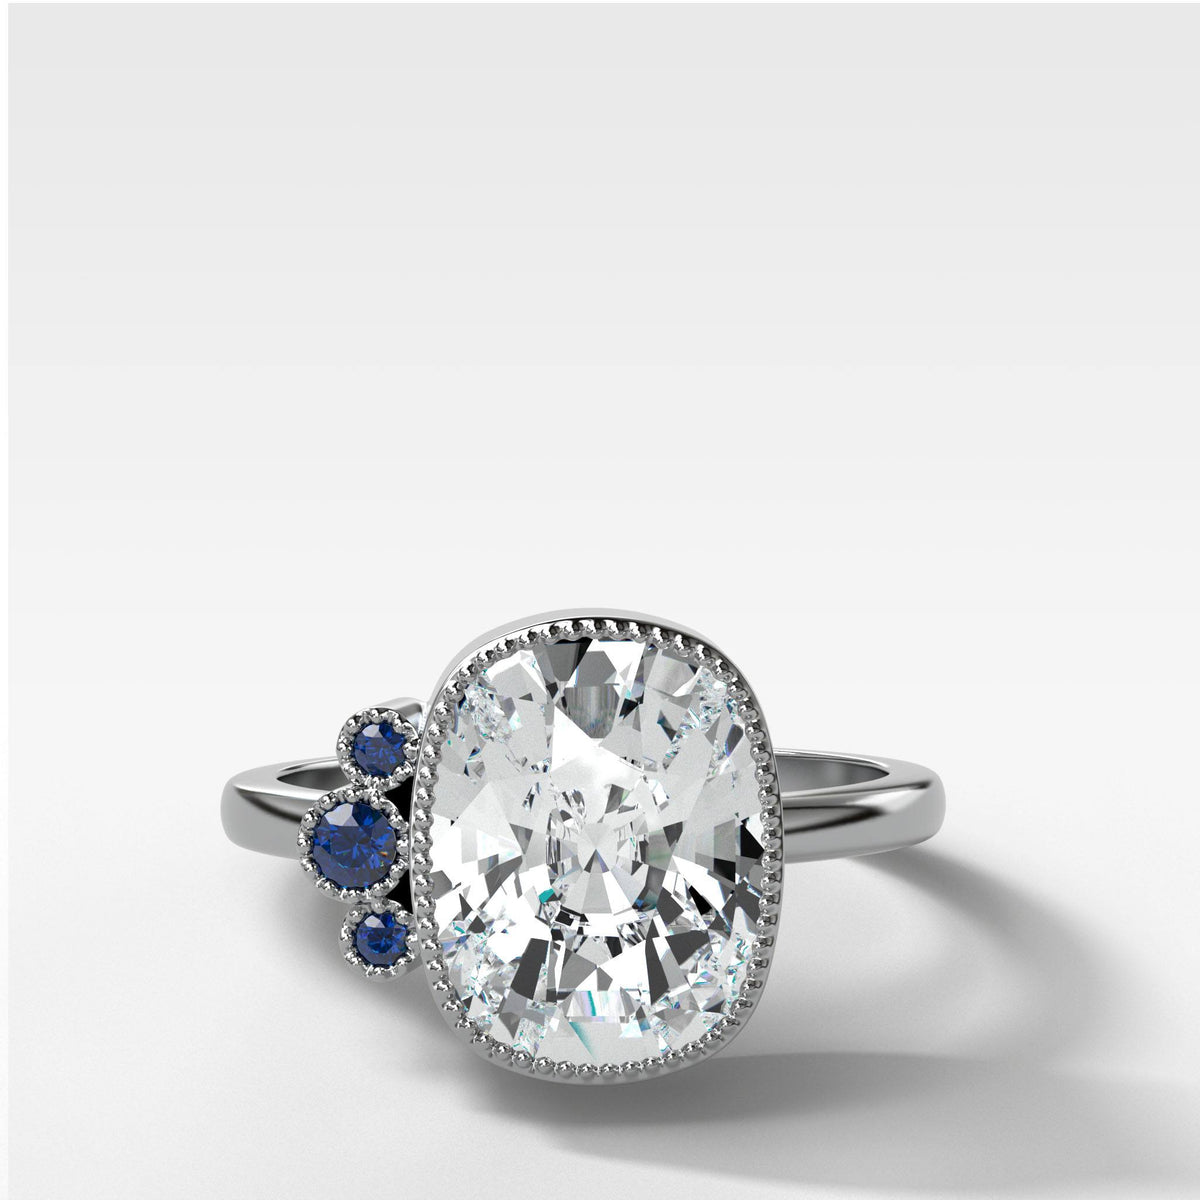 Blue Cluster Engagement Ring With Elongated Cushion Cut by Good Stone in White Gold